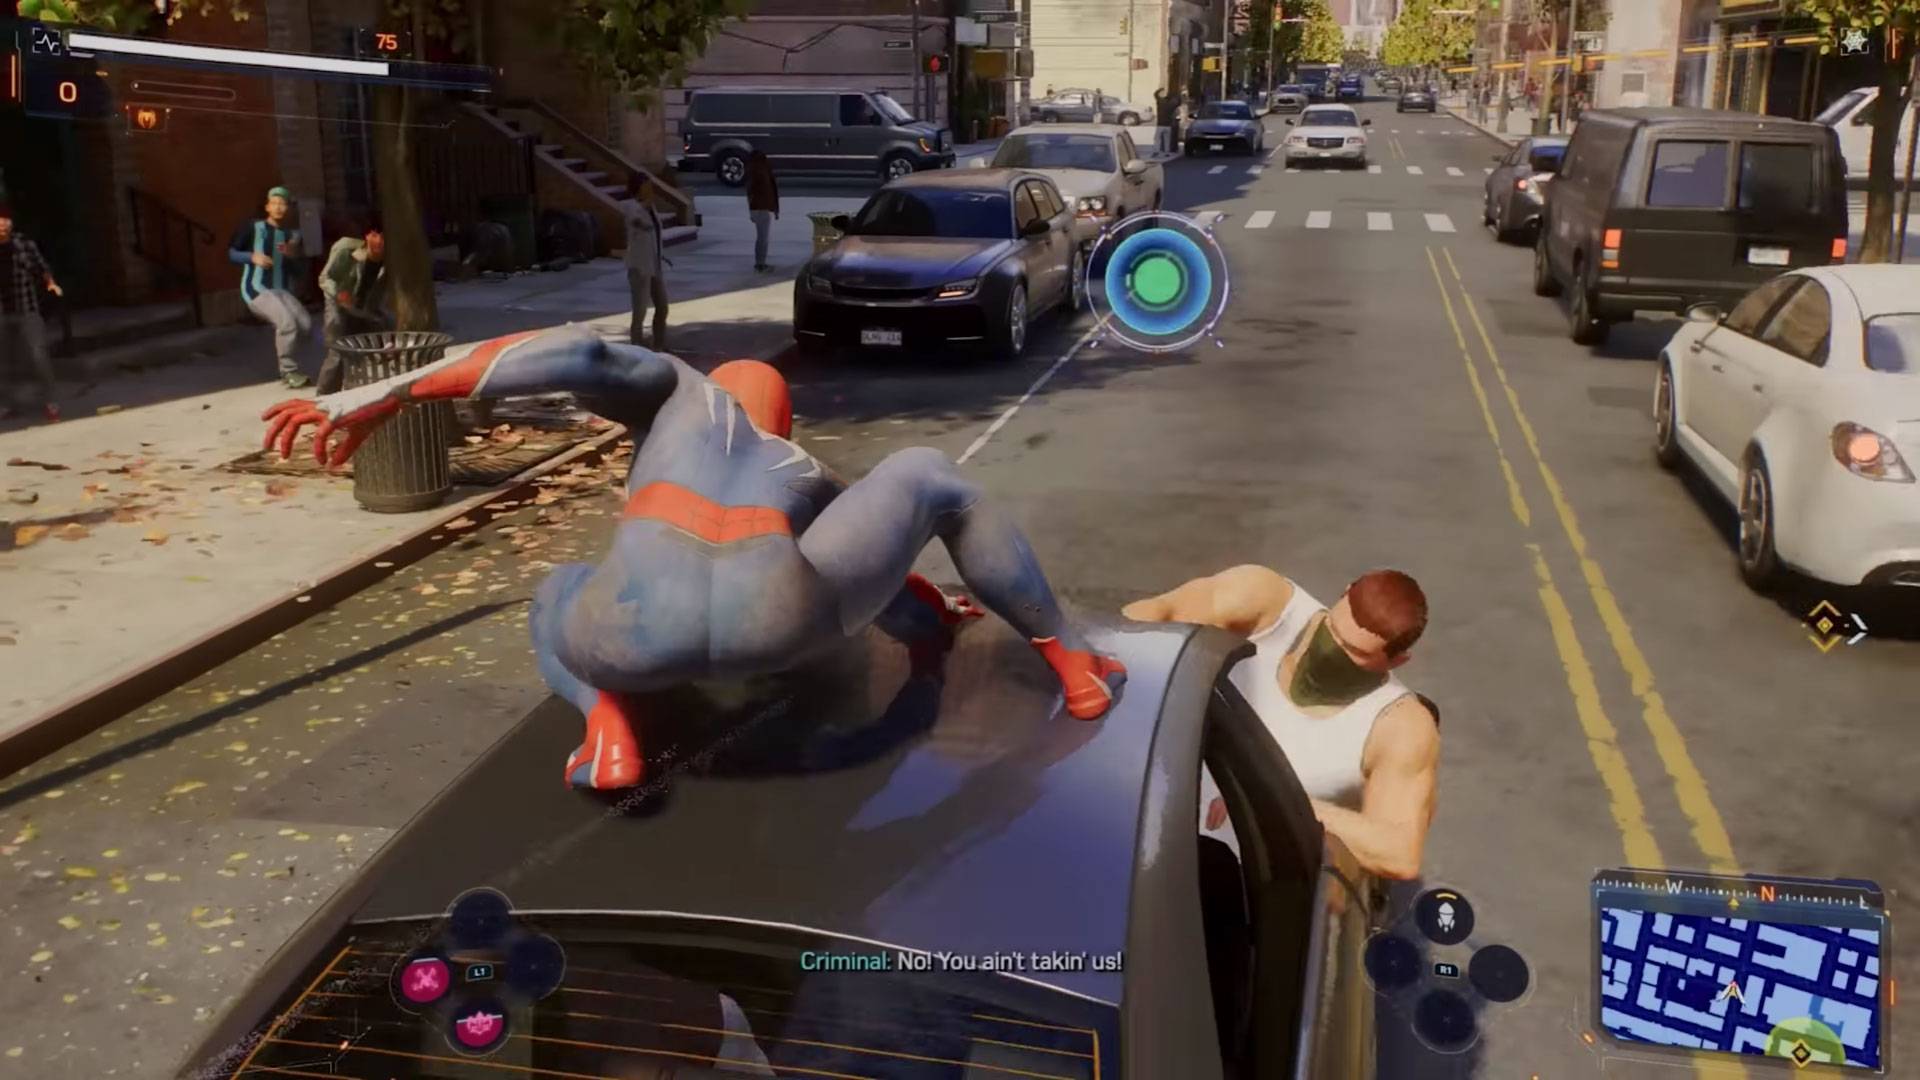 PlayStation Showcase Trailer of Spider-Man 2 Subtly Hints at